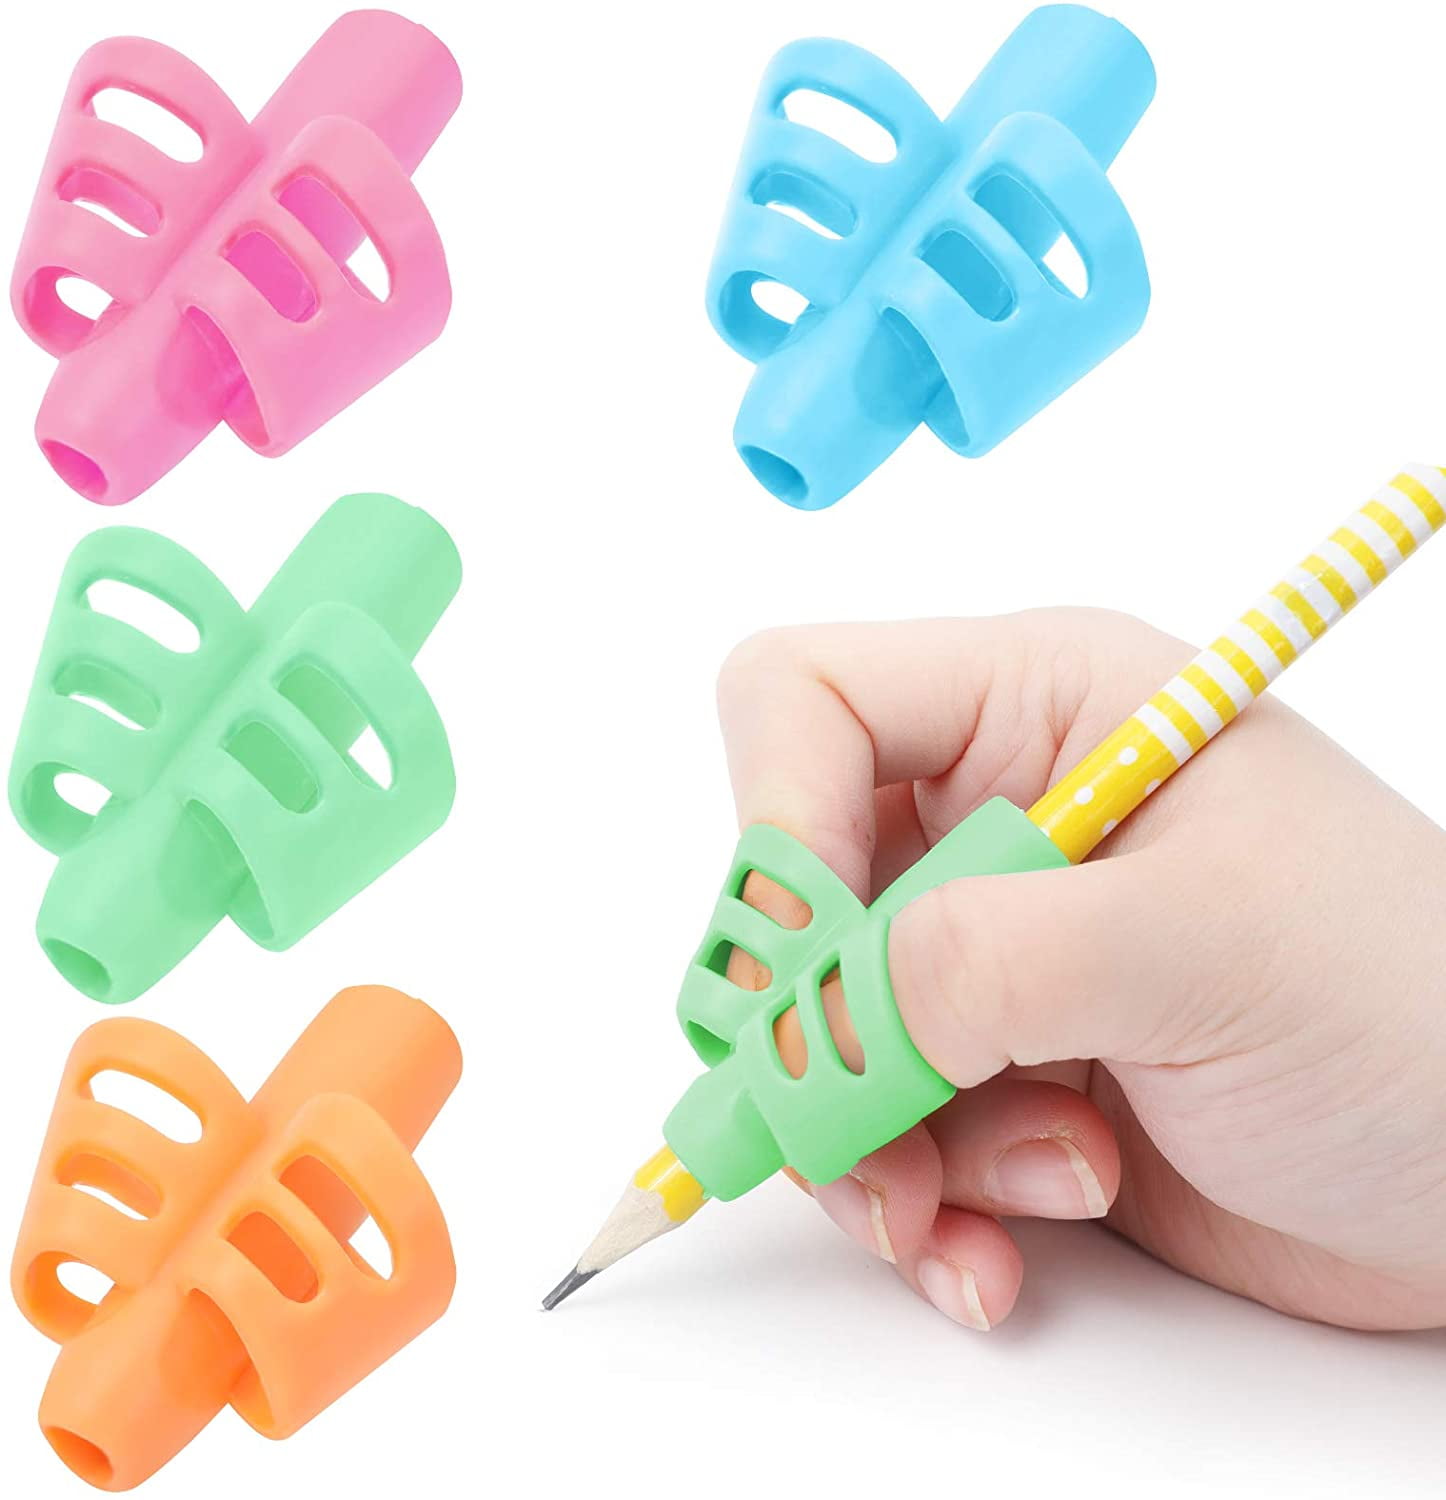 Ergonomic Pencil Grips Silicone Pencil Holder Pen Writing Aid Grip Trainer Posture Correction Tool Finger Grip for Children Kids Students Adults Preschools Handwriting 3 Pack 